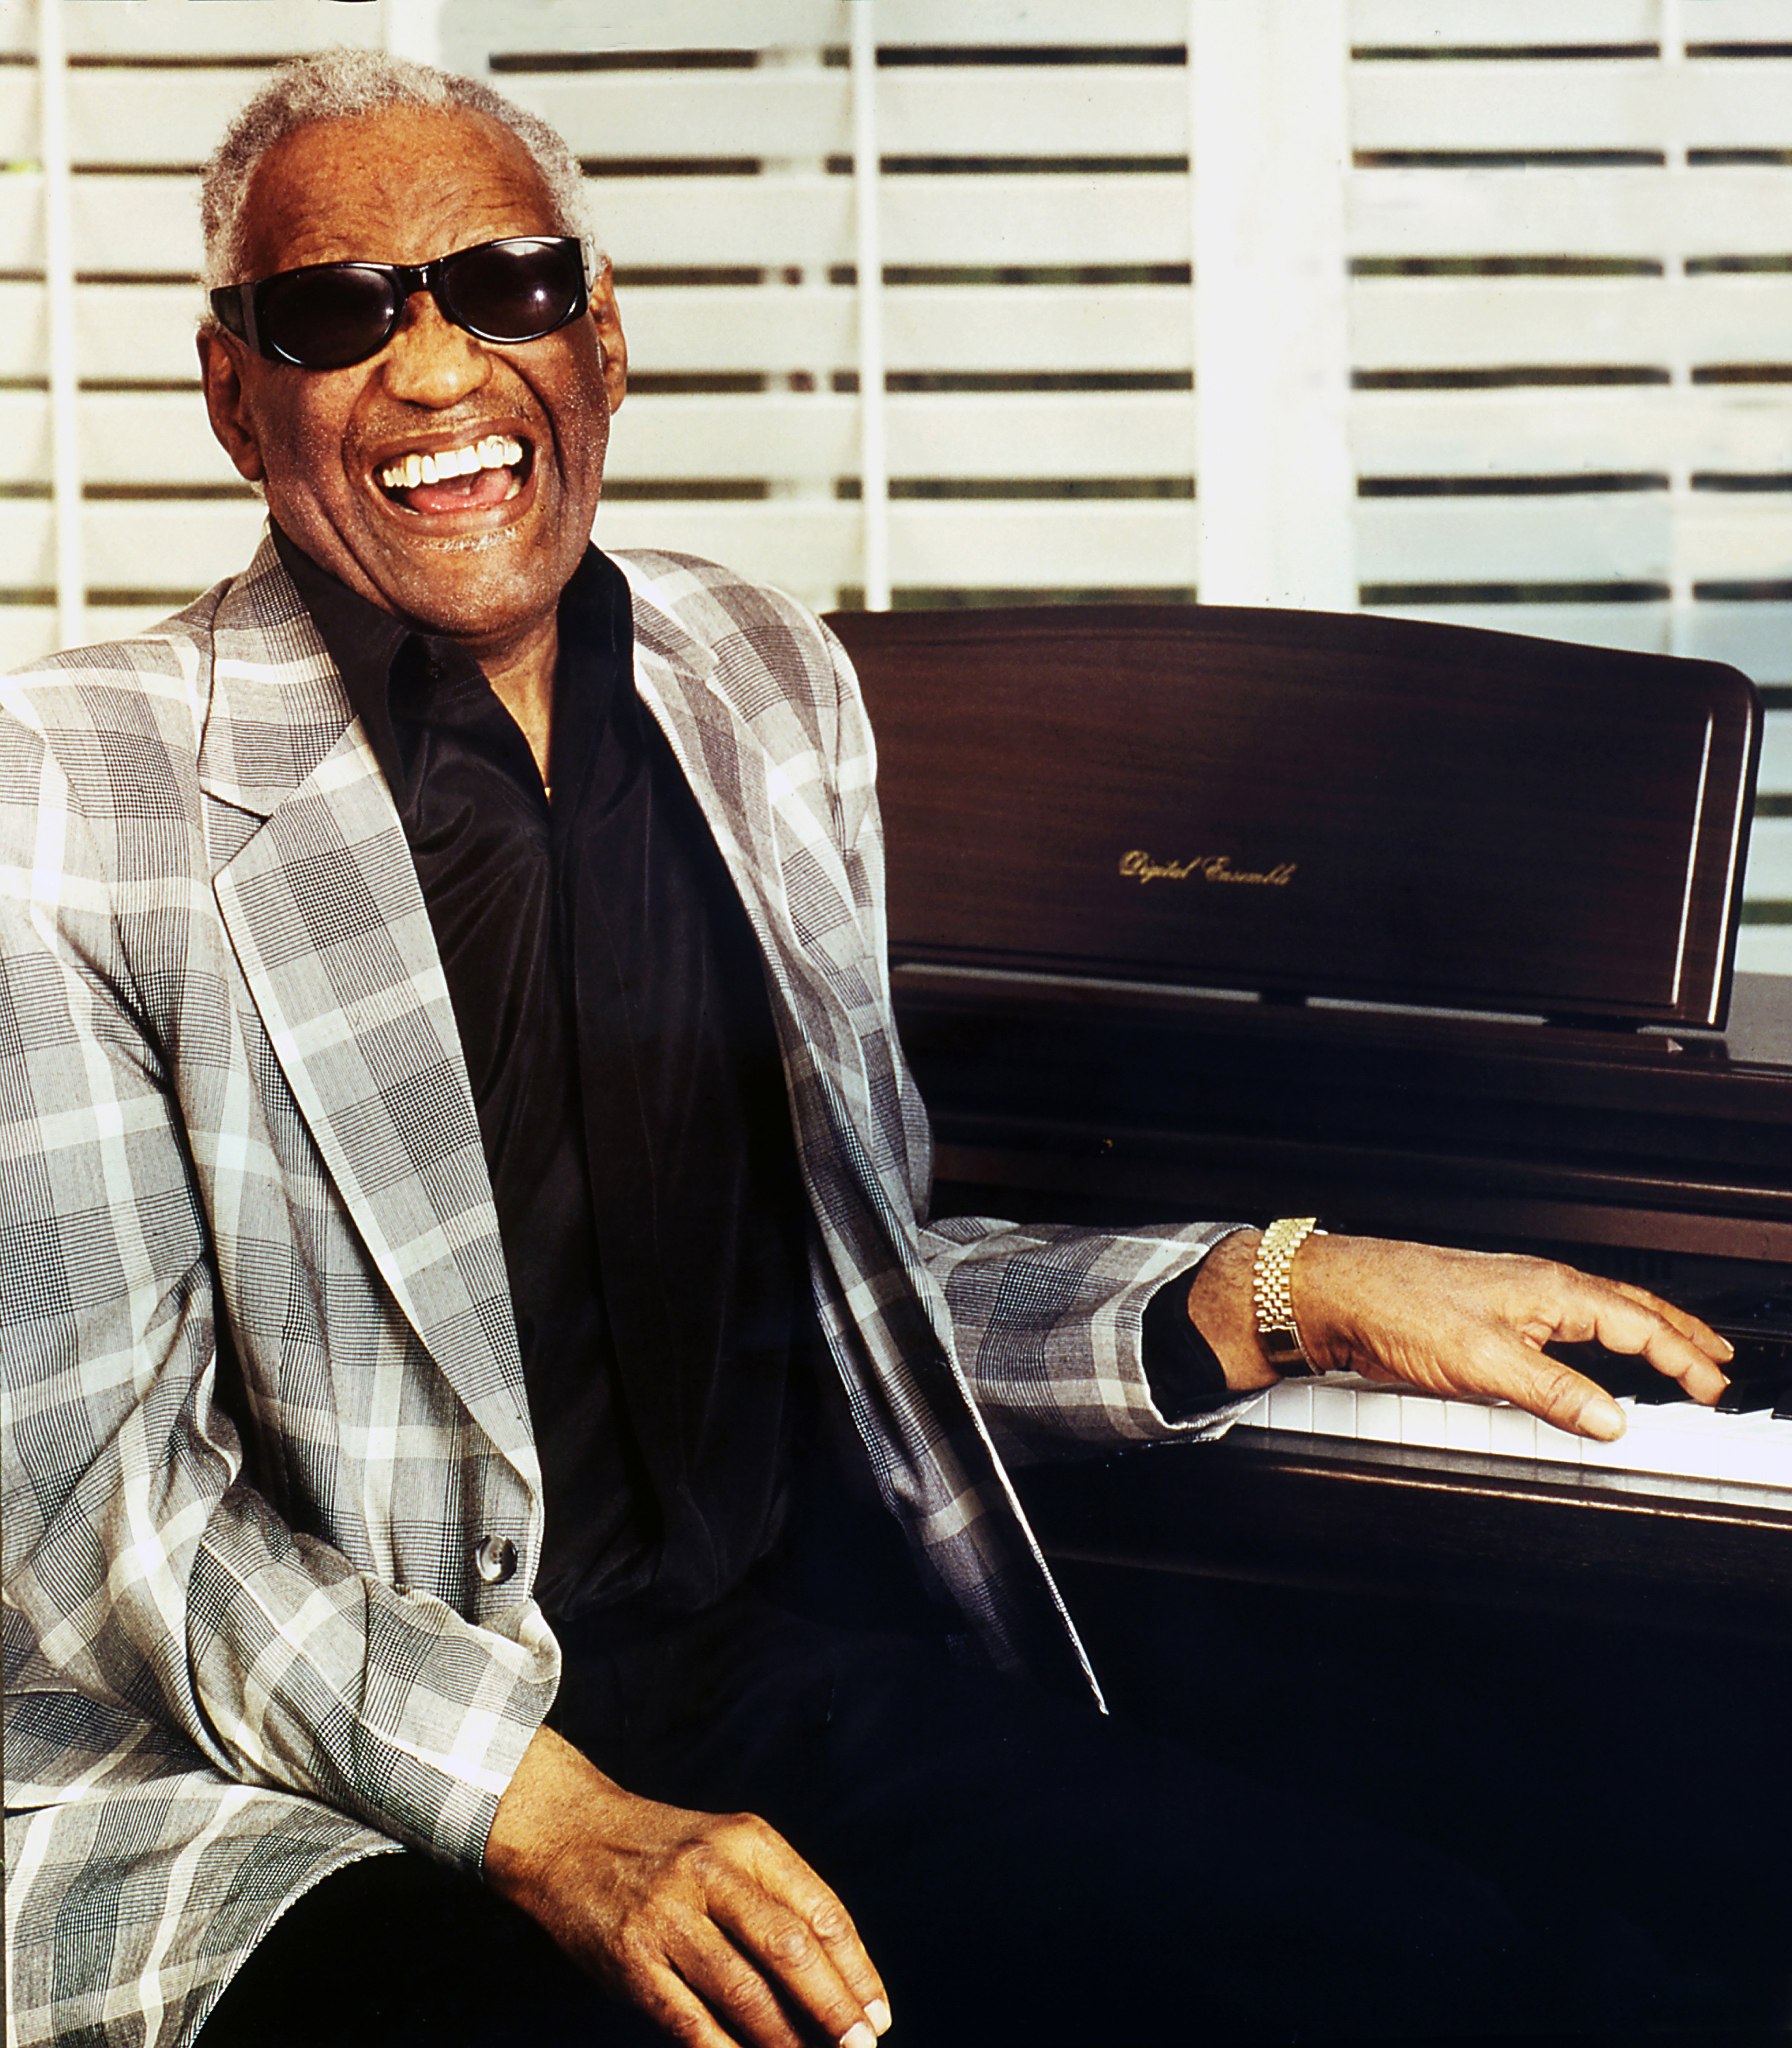 Singer Ray Charles sitting at the piano in his home studio in Los Angeles in May 1995. | Source: Getty Images